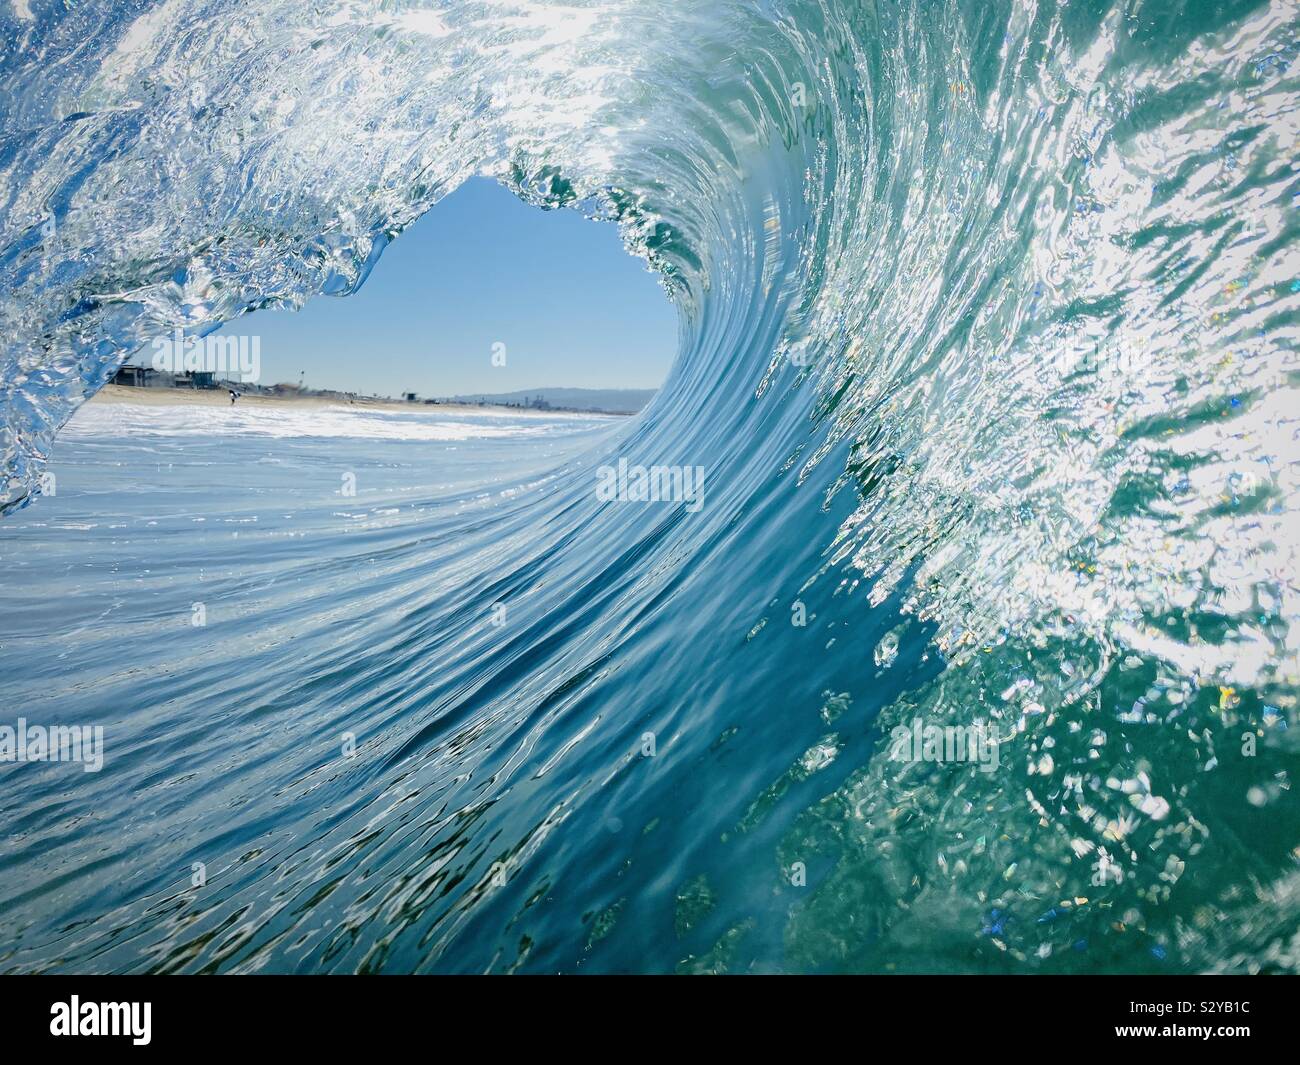 Inside, looking out of a barreling wave. Manhattan Beach, California USA. Stock Photo